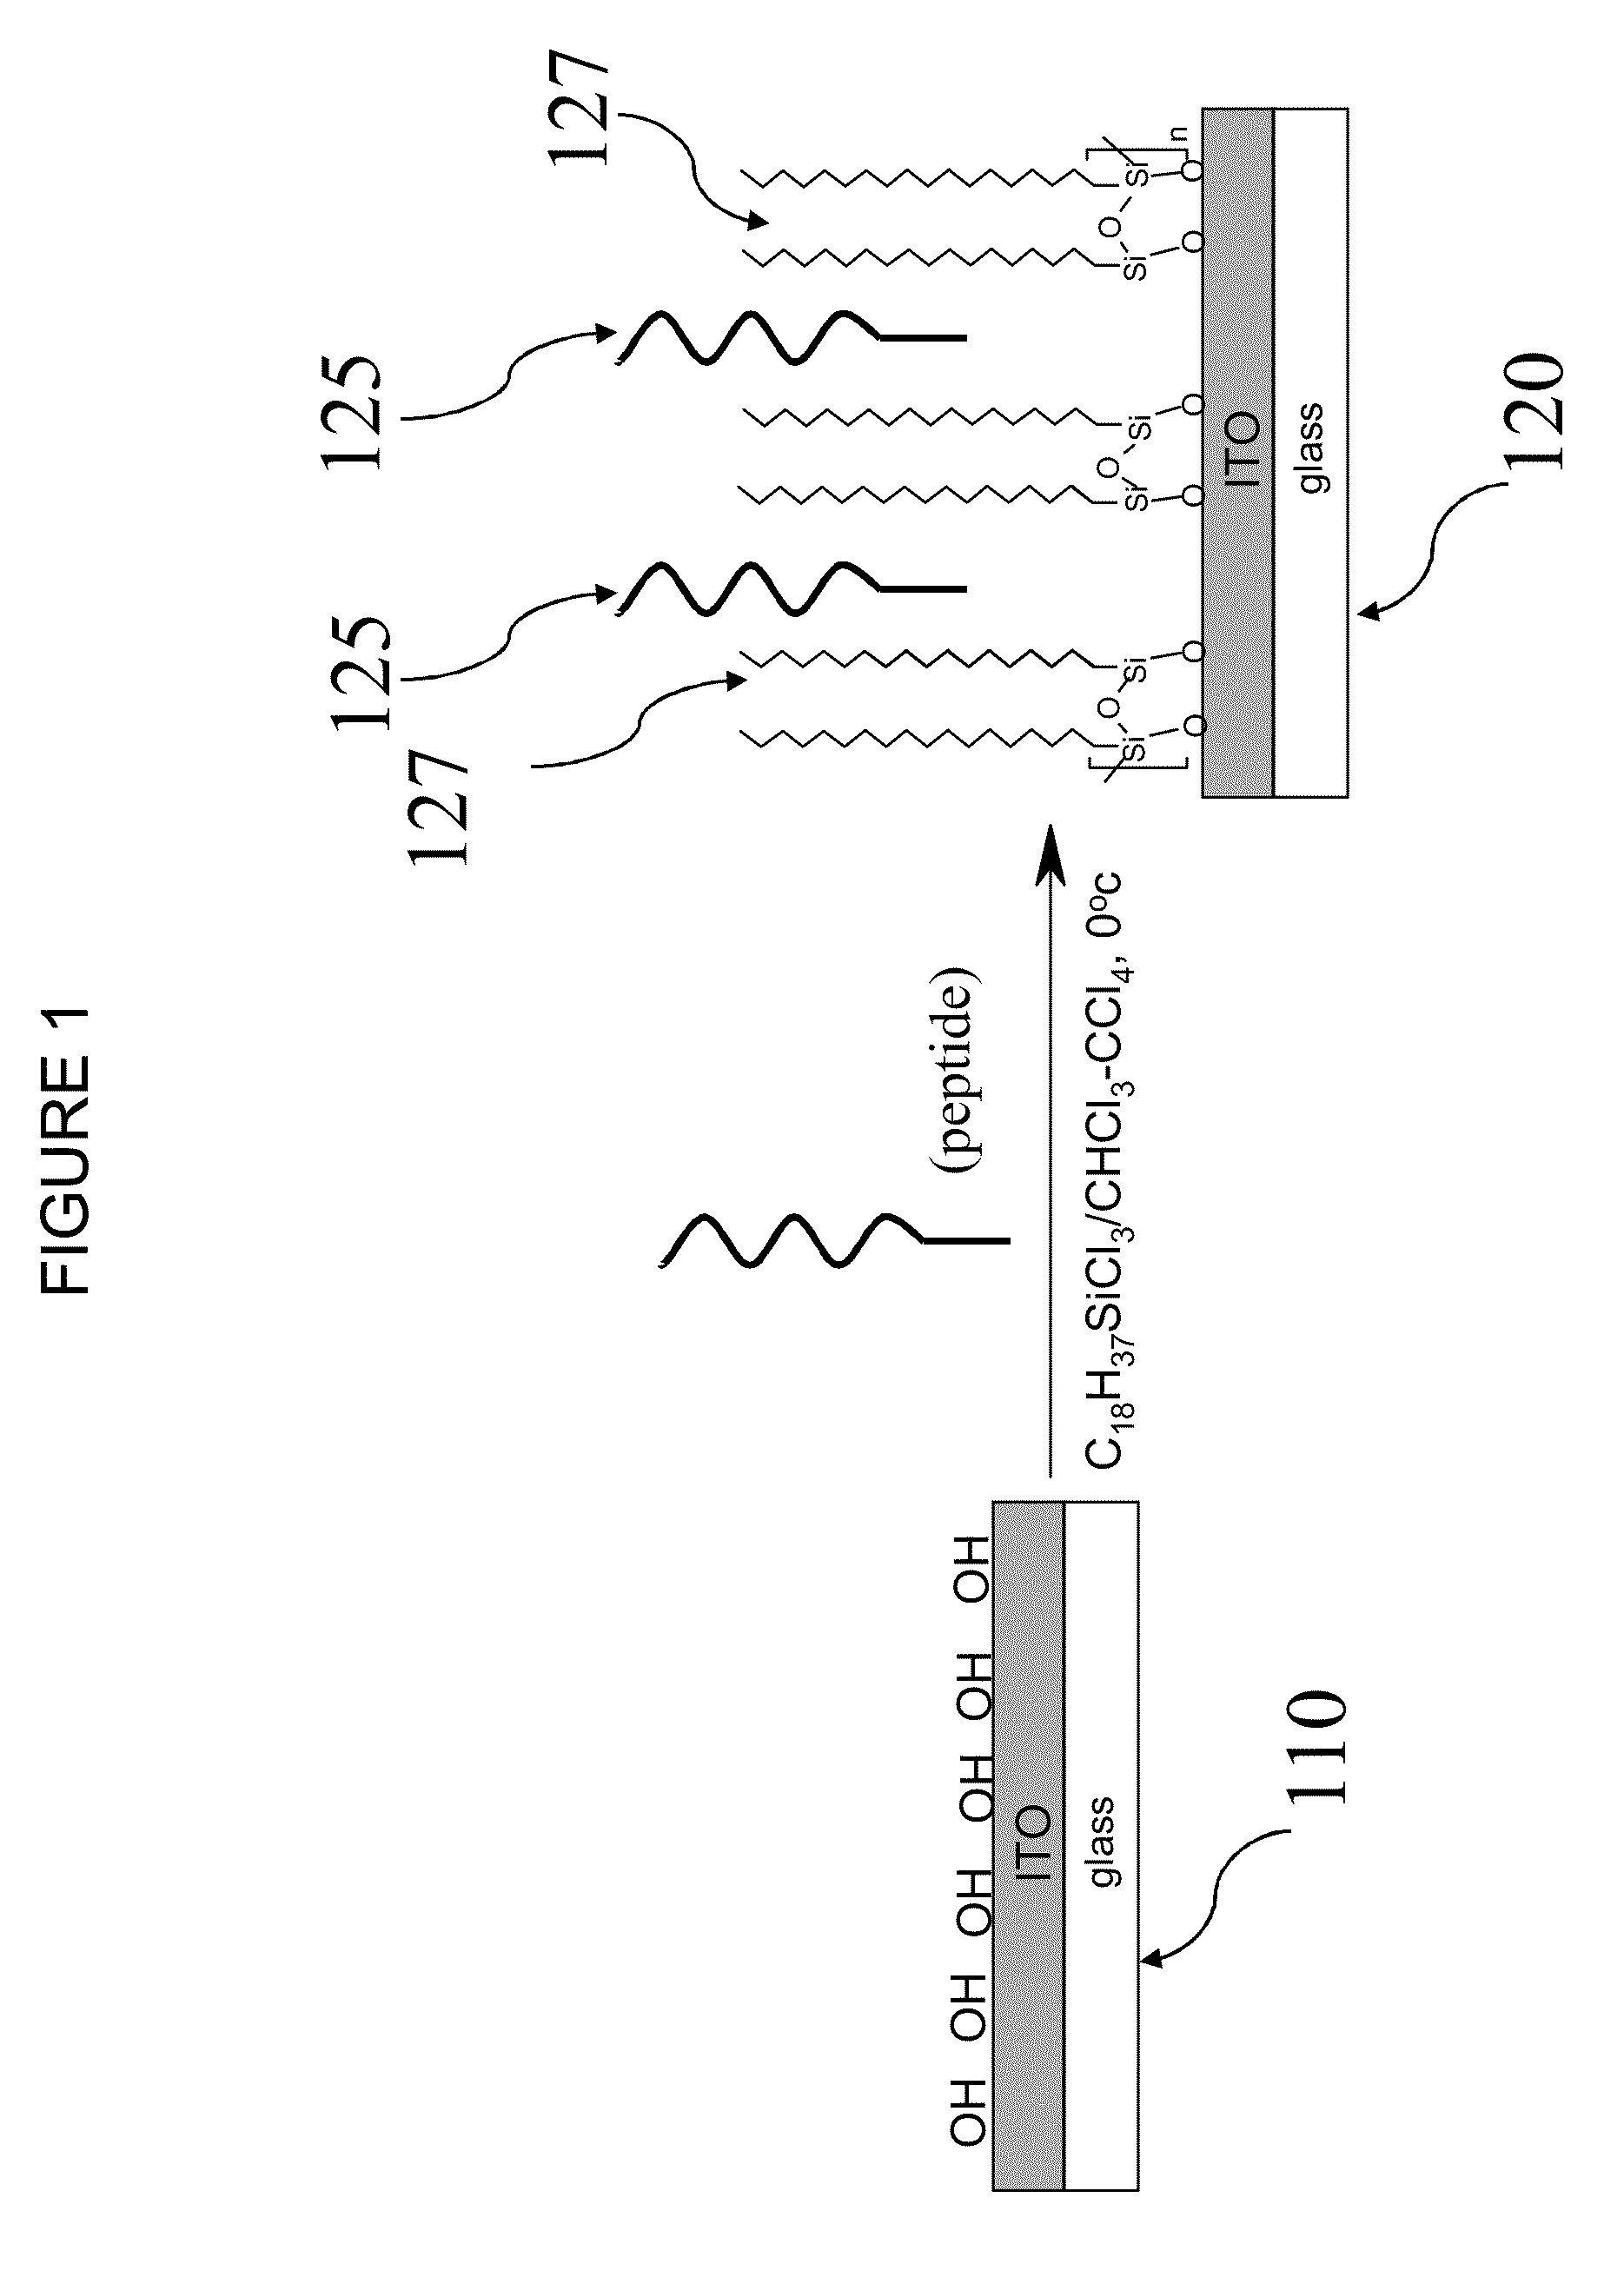 Methods for detecting and/or quantifying a concentration of specific bacterial molecules using bacterial biosensors